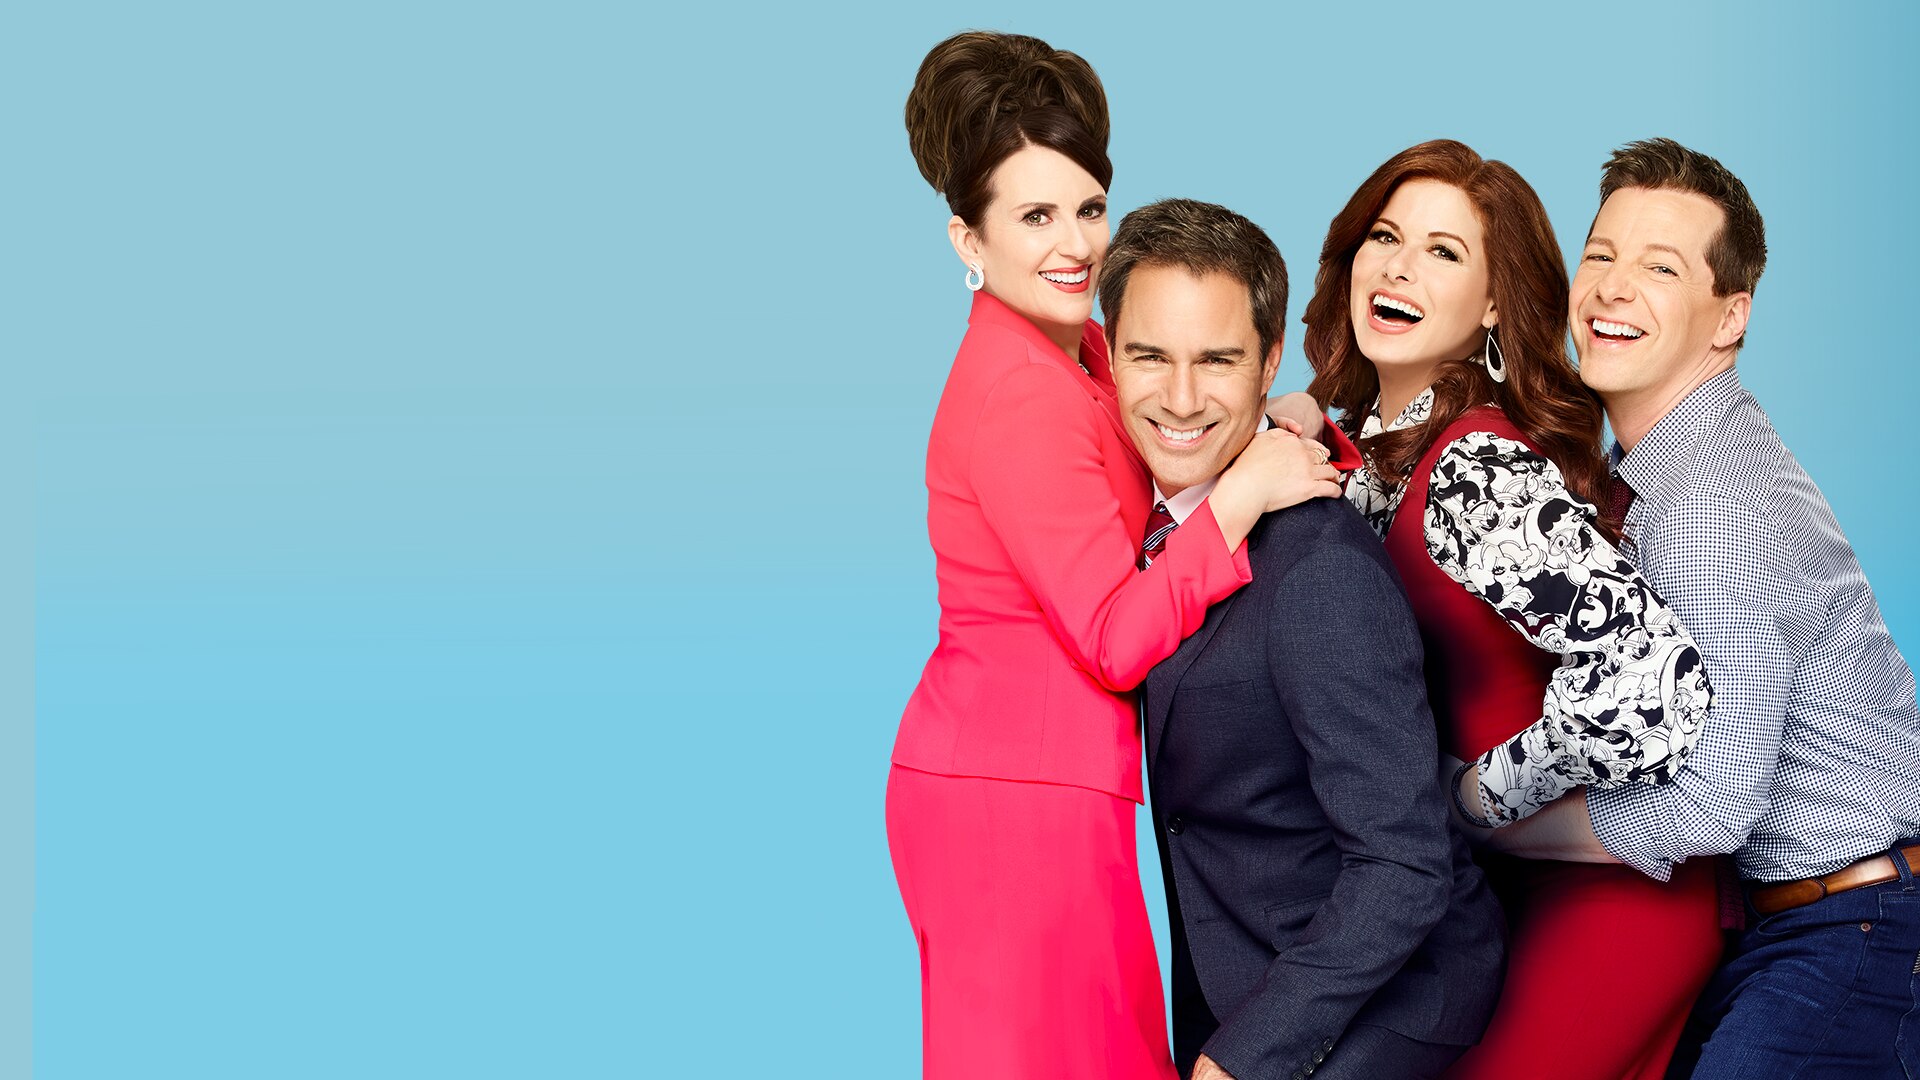 Will and grace season 4 episode guide